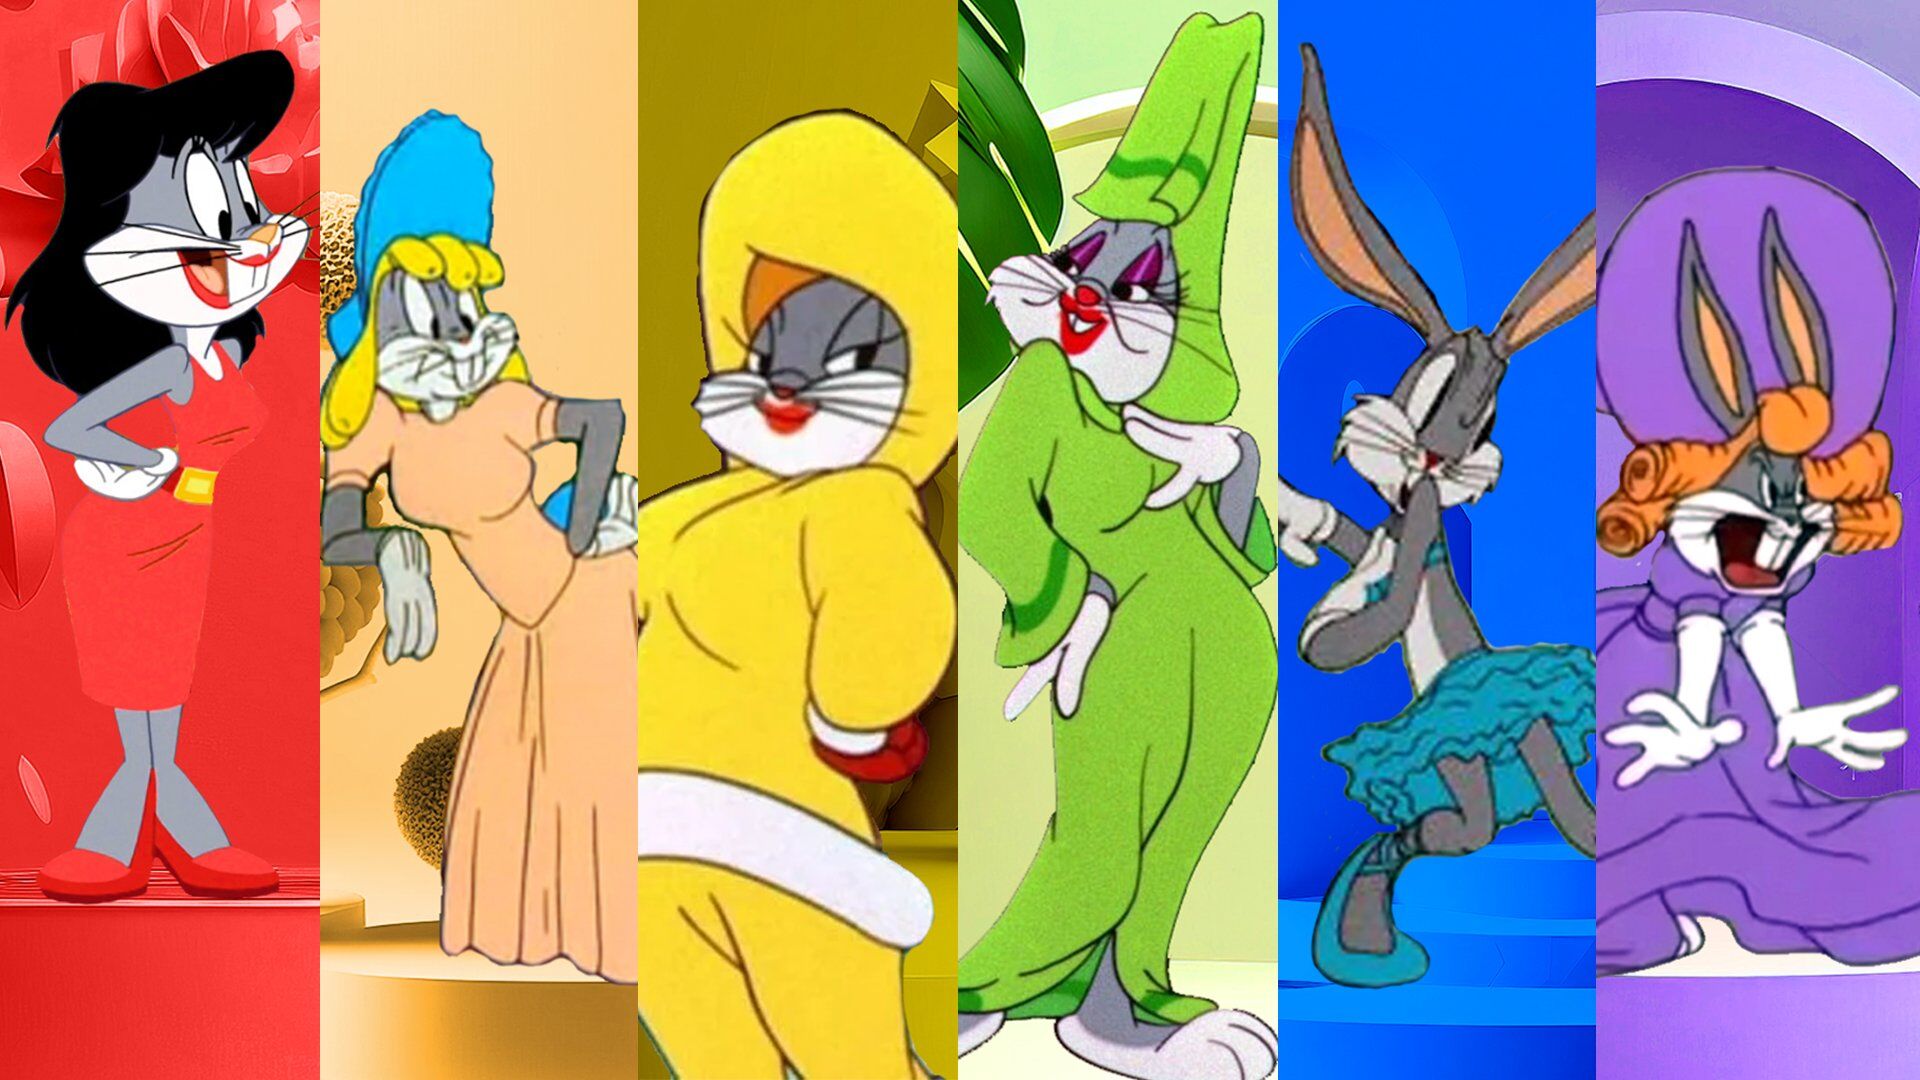 Bugs Bunny celebrated Pride Month with a Twitter drag show